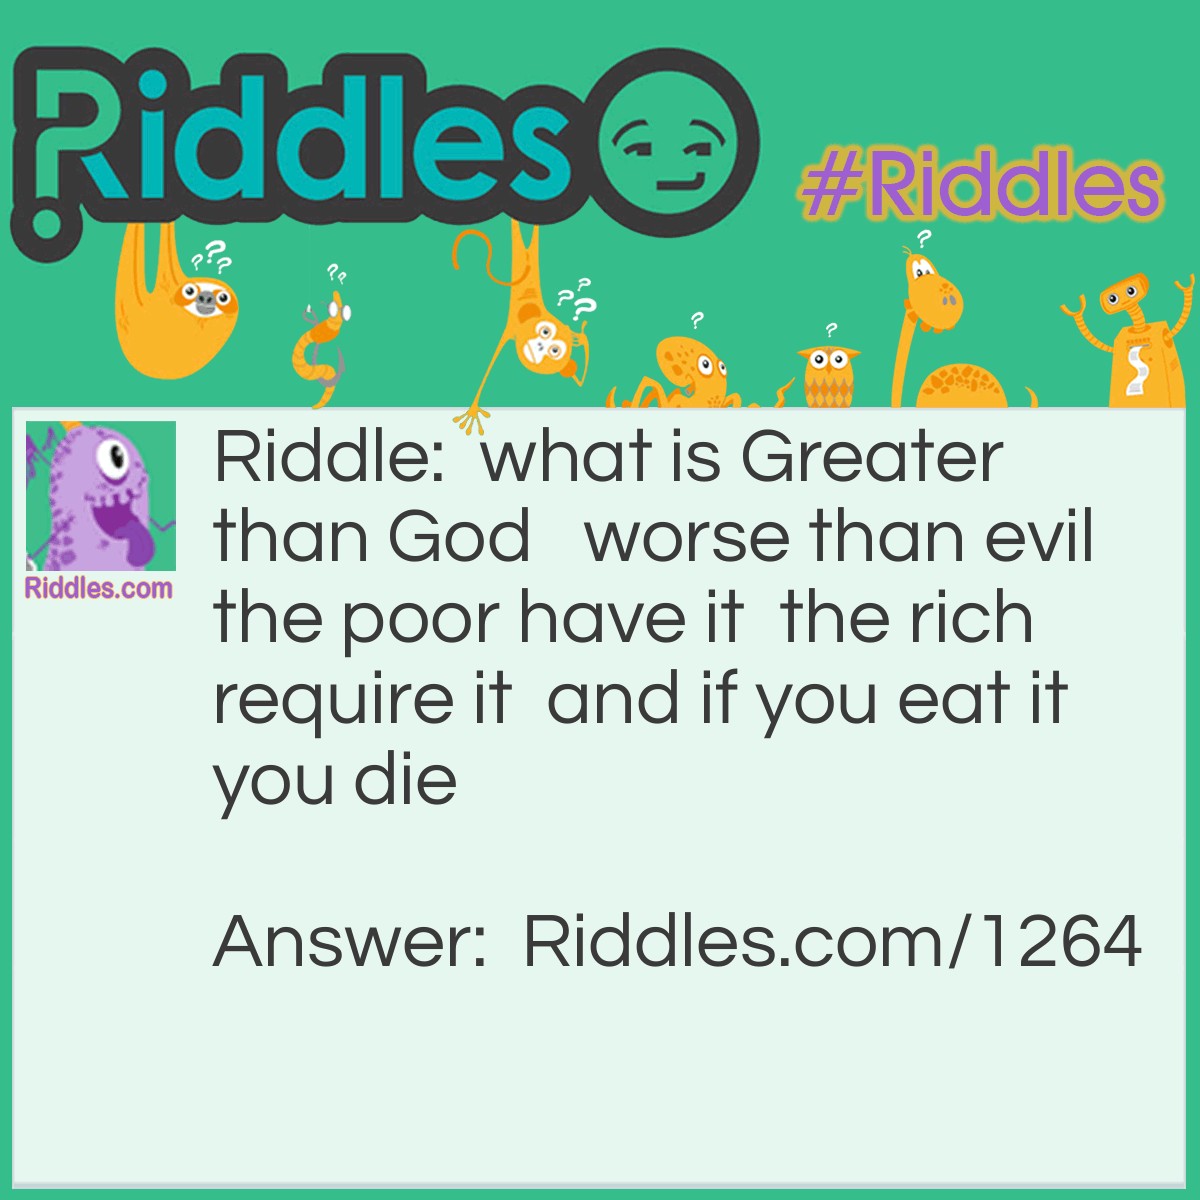 Riddle: What is Greater than God, worse than evil, the poor have it, the rich require it and if you eat it you die? Answer: Nothing  nothing is better than God nothing is worse than evil the poor have nothing the rich don't have nothing they have everything  If you eat nothing you die